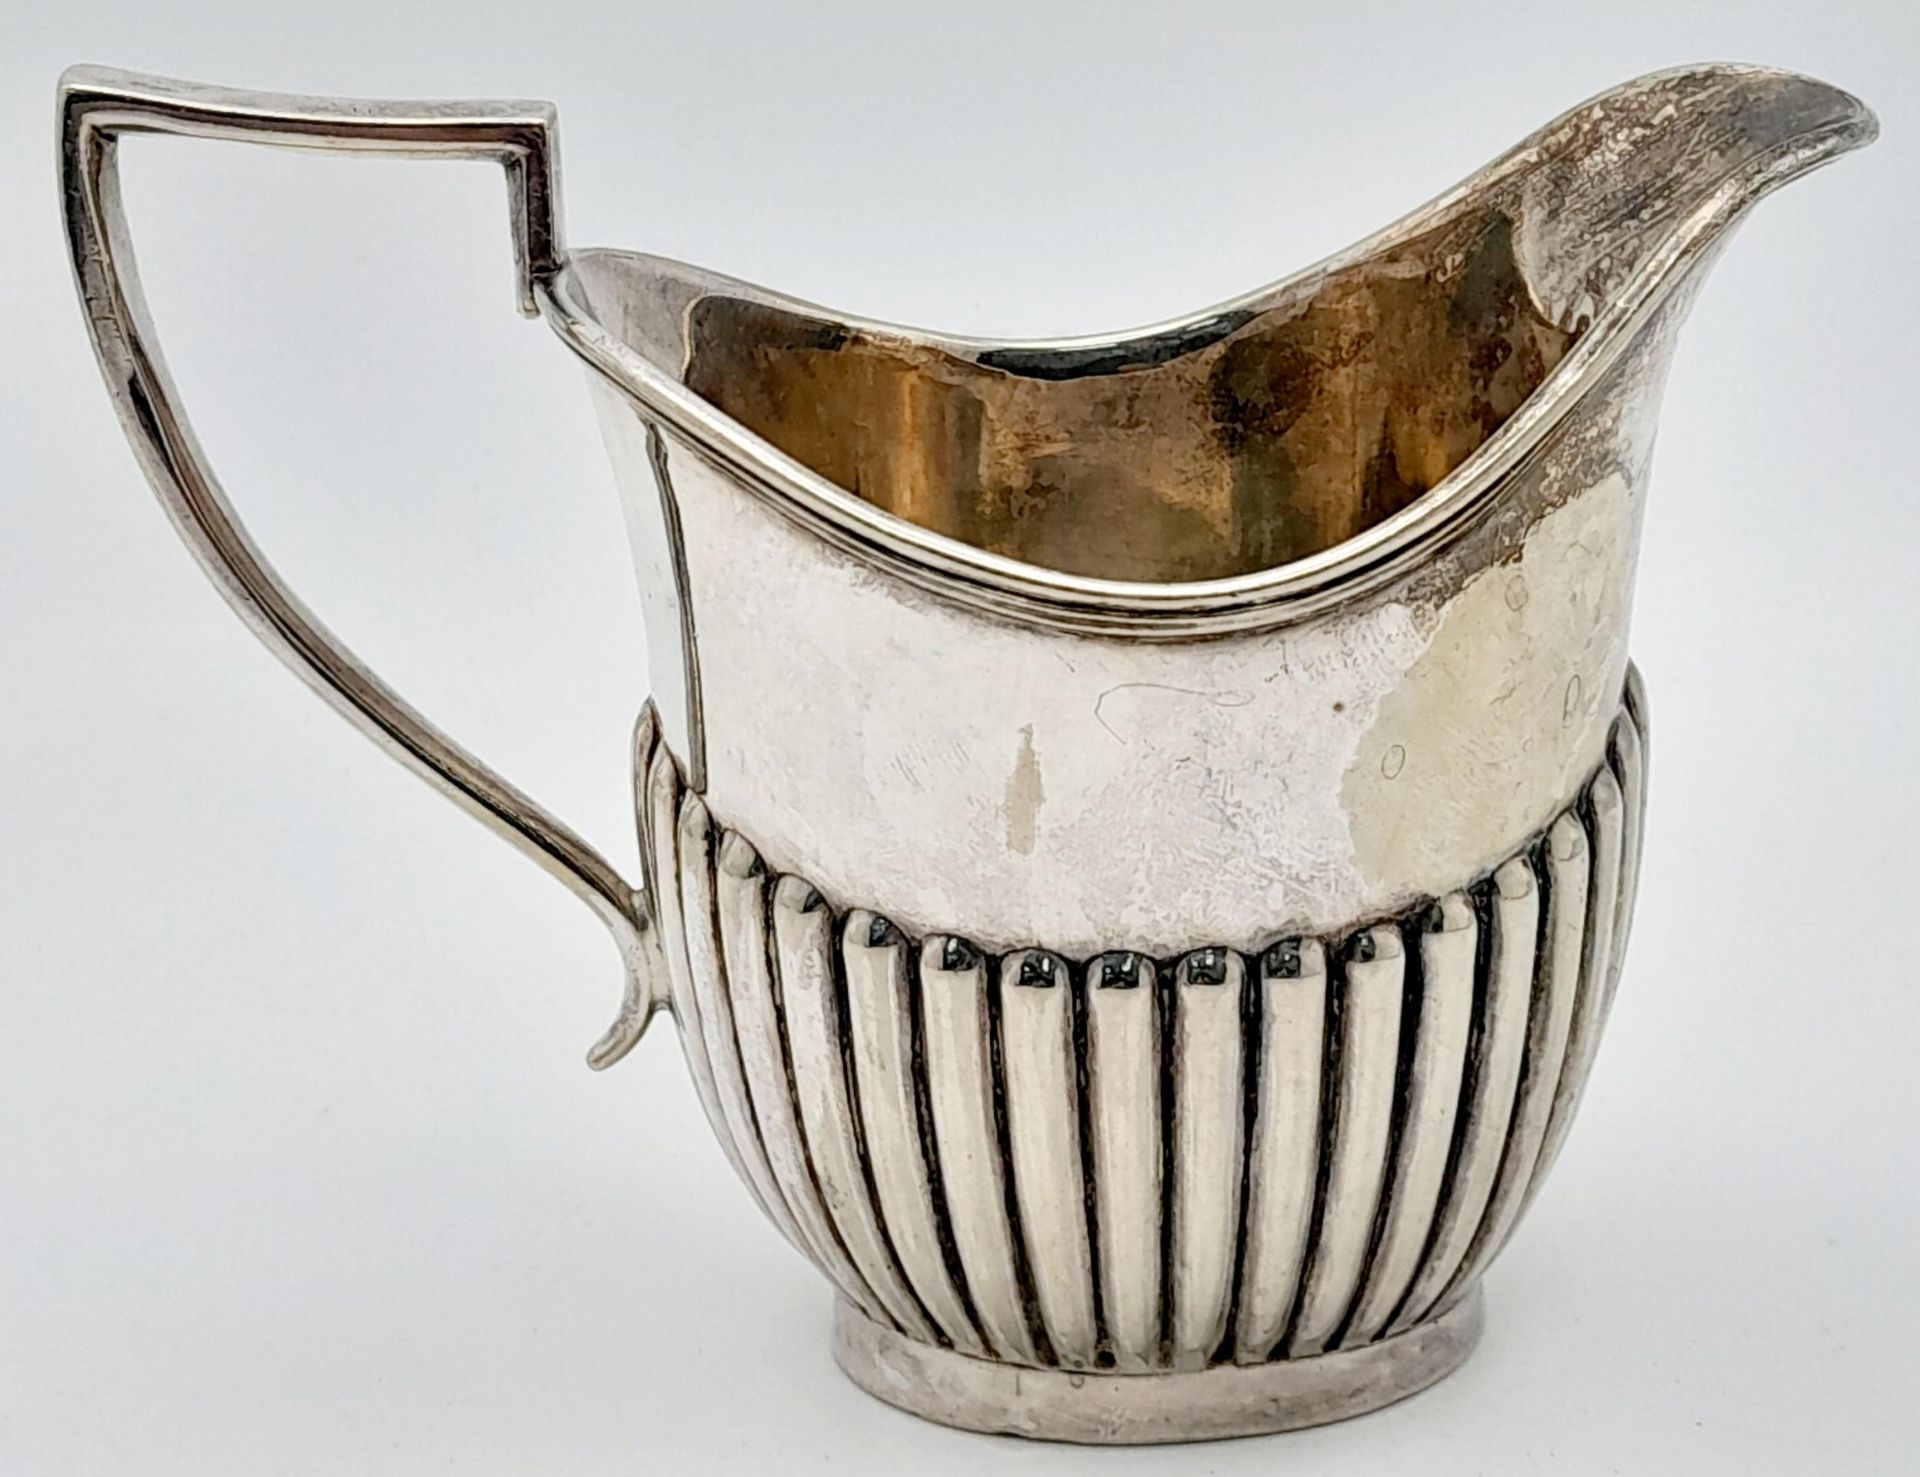 3rd Reich Silver Plated Milk/Cream Jug. - Image 3 of 6